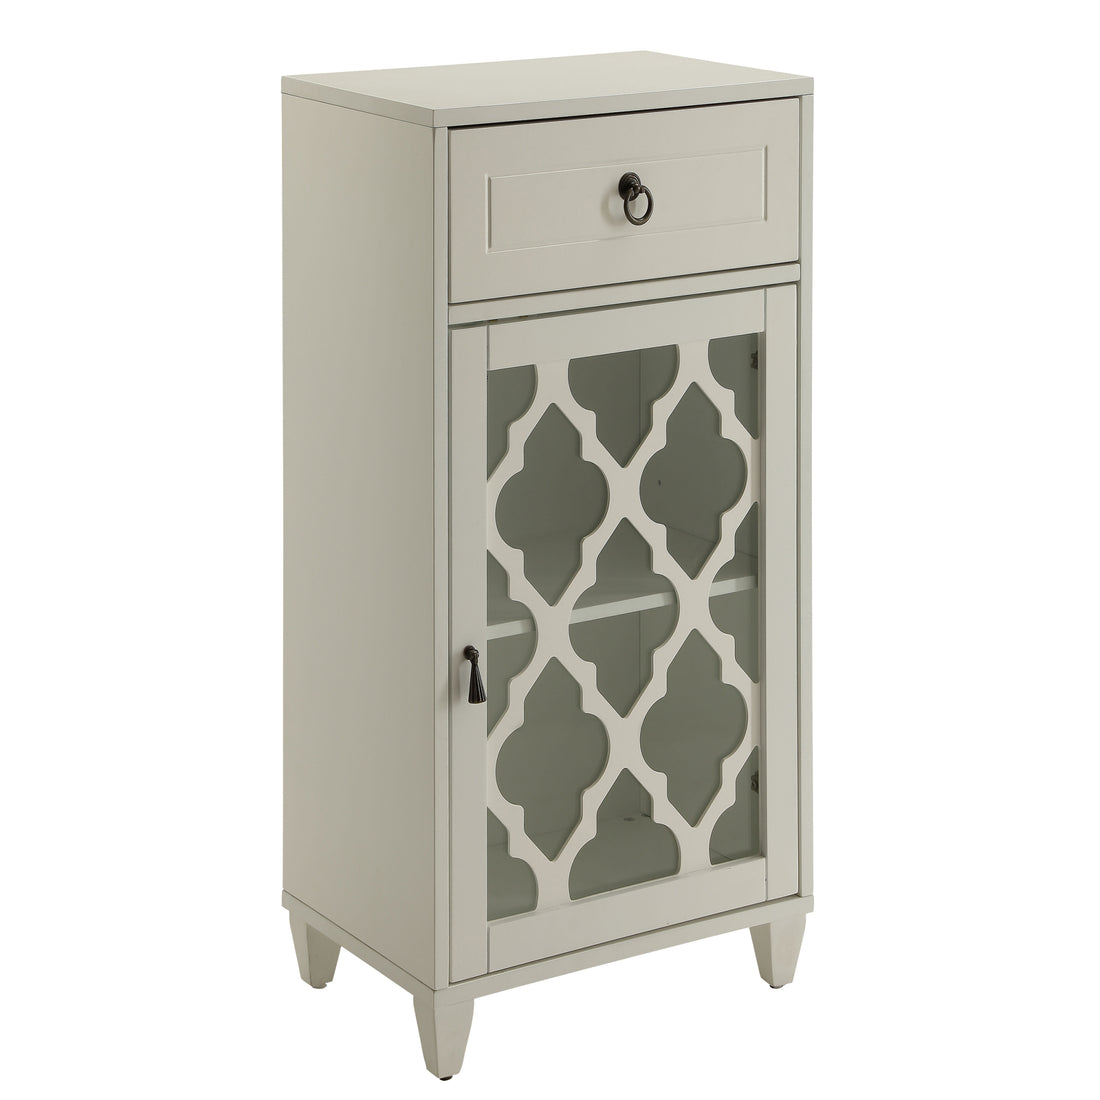 White Side Table With Drawer And Door - White